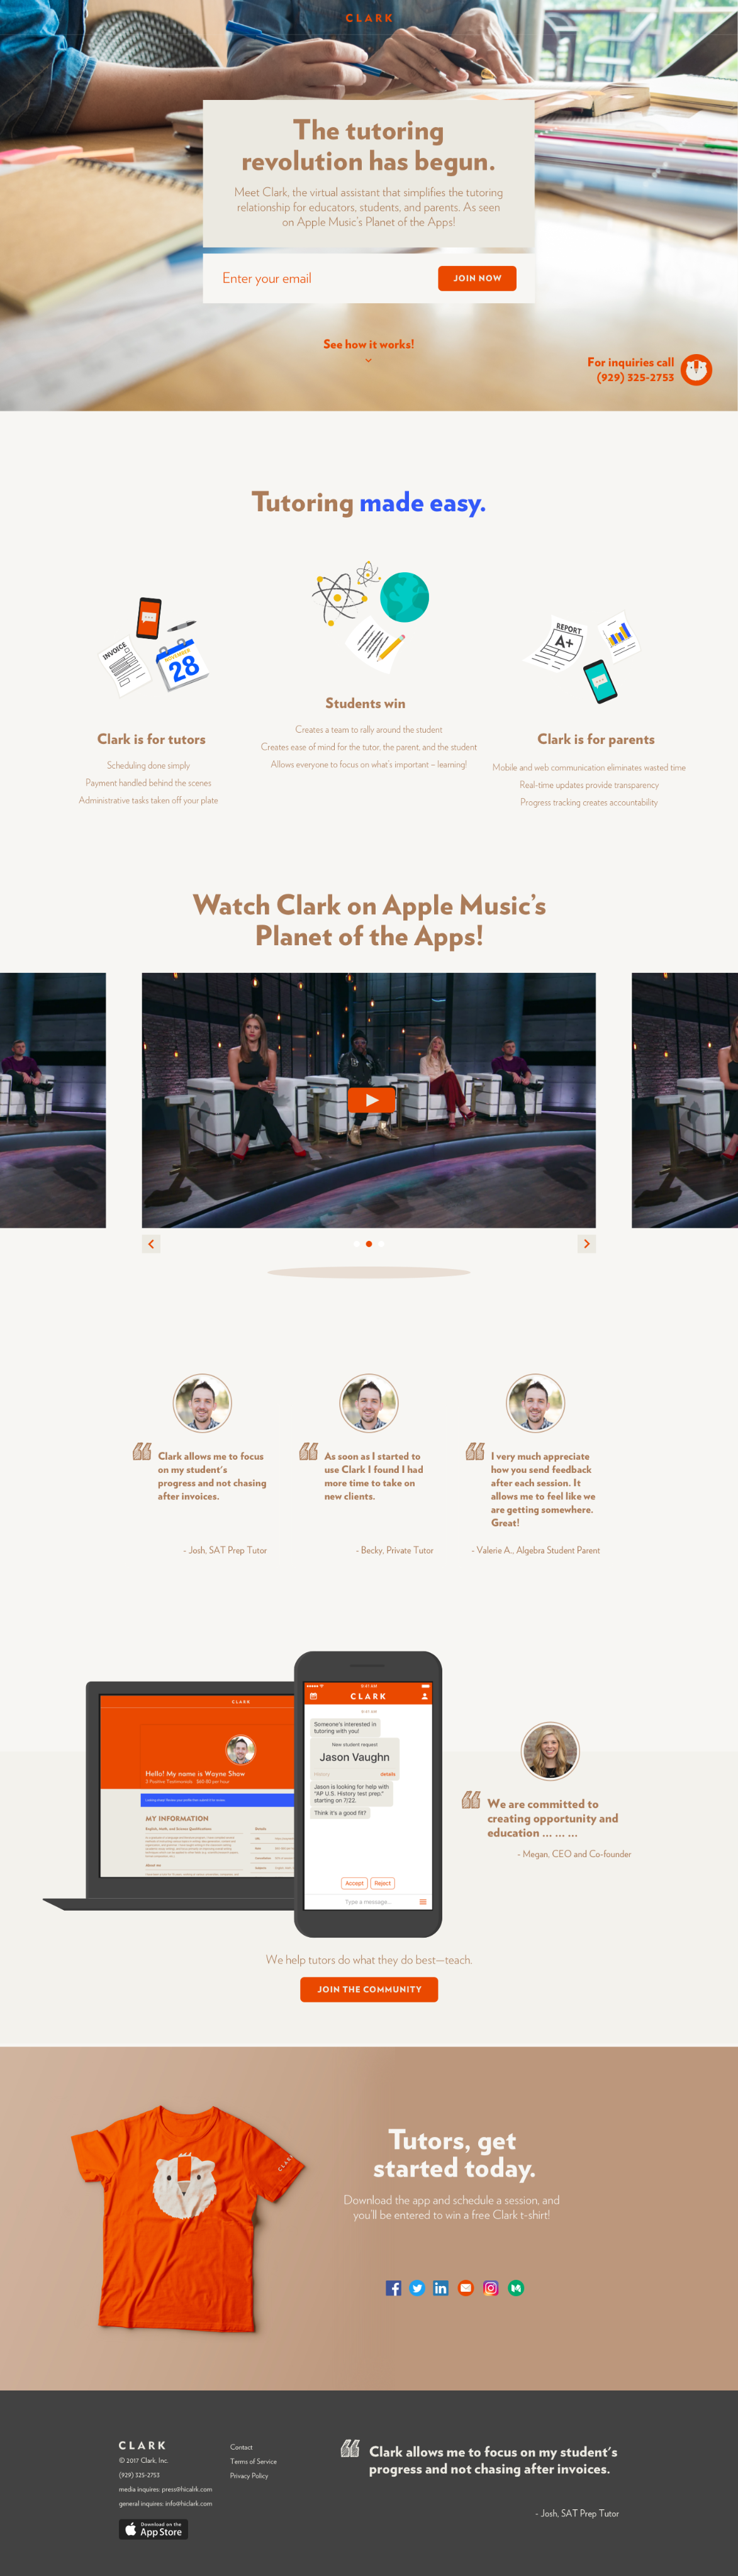 Screenshot of page promoting Clark's appearance on Planet of the Apps.